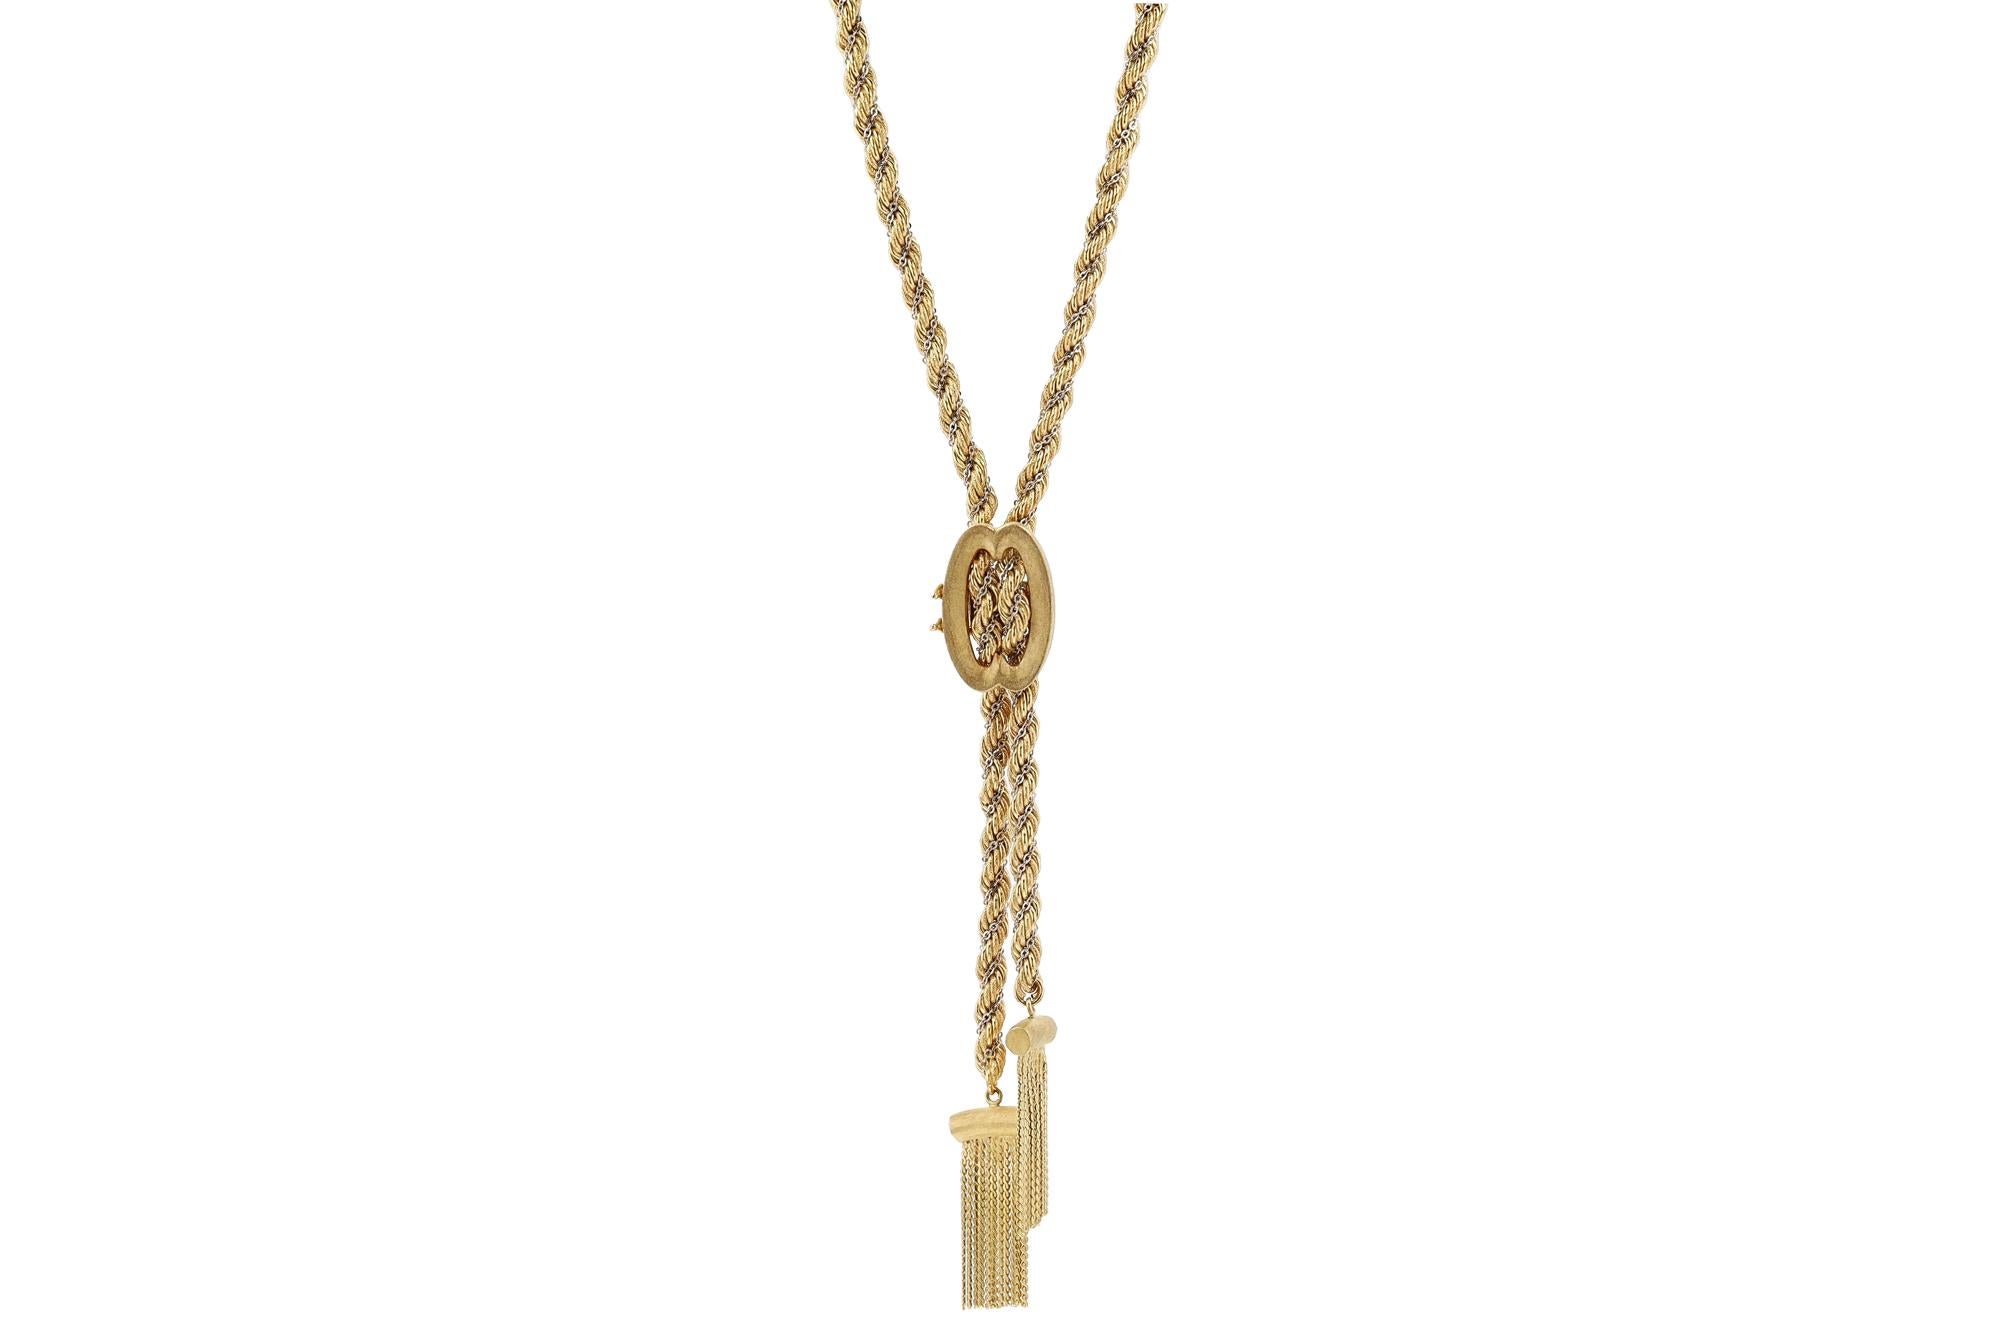 This lengthy and luxurious lariat necklace is a head turning 38 inches long, 1970s vintage in nearly new condition. Featuring a  two tone twisted rope chain and a florentine finish bolo allowing styling adjustment. The sustainable 18 karat yellow